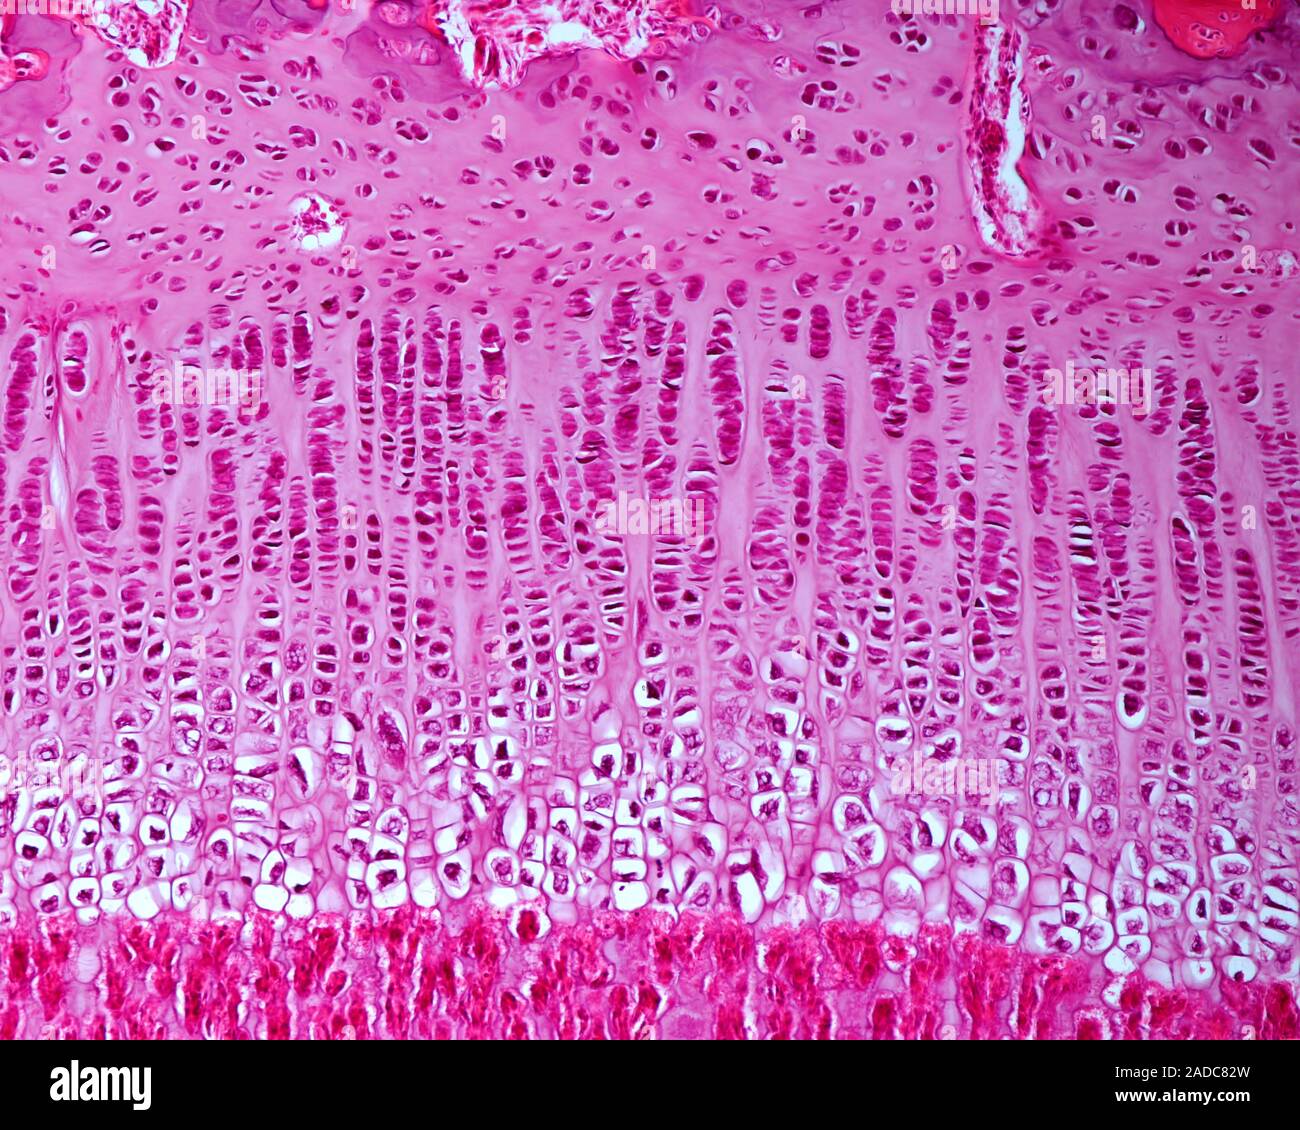 Light Micrograph Of The Epiphyseal Growth Plate Of A Developing Long Bone The Epiphyseal 2964